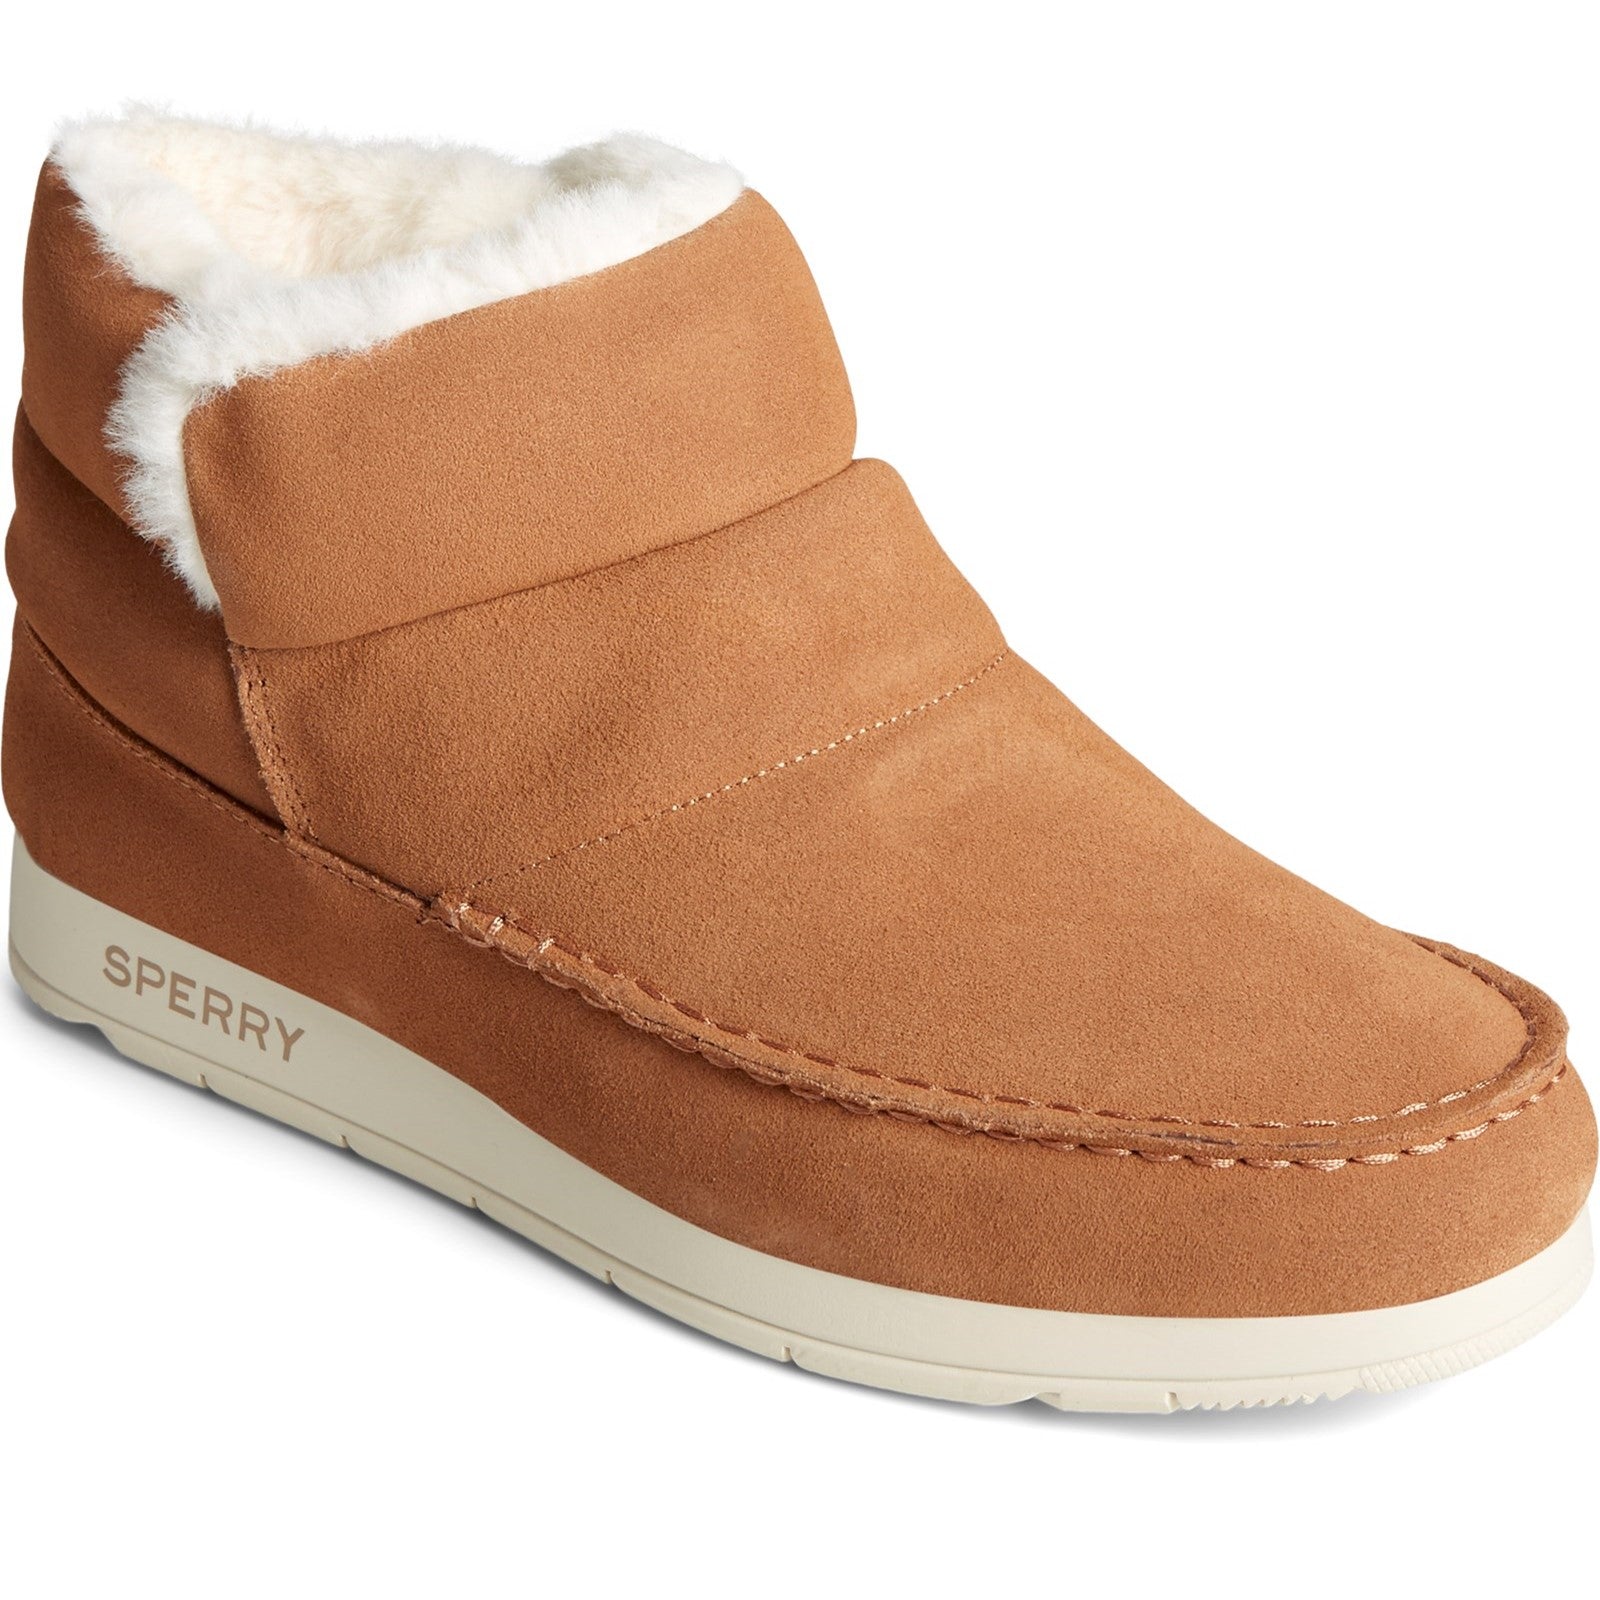 Sperry Womens Moc-Sider Leather Booties - Tan